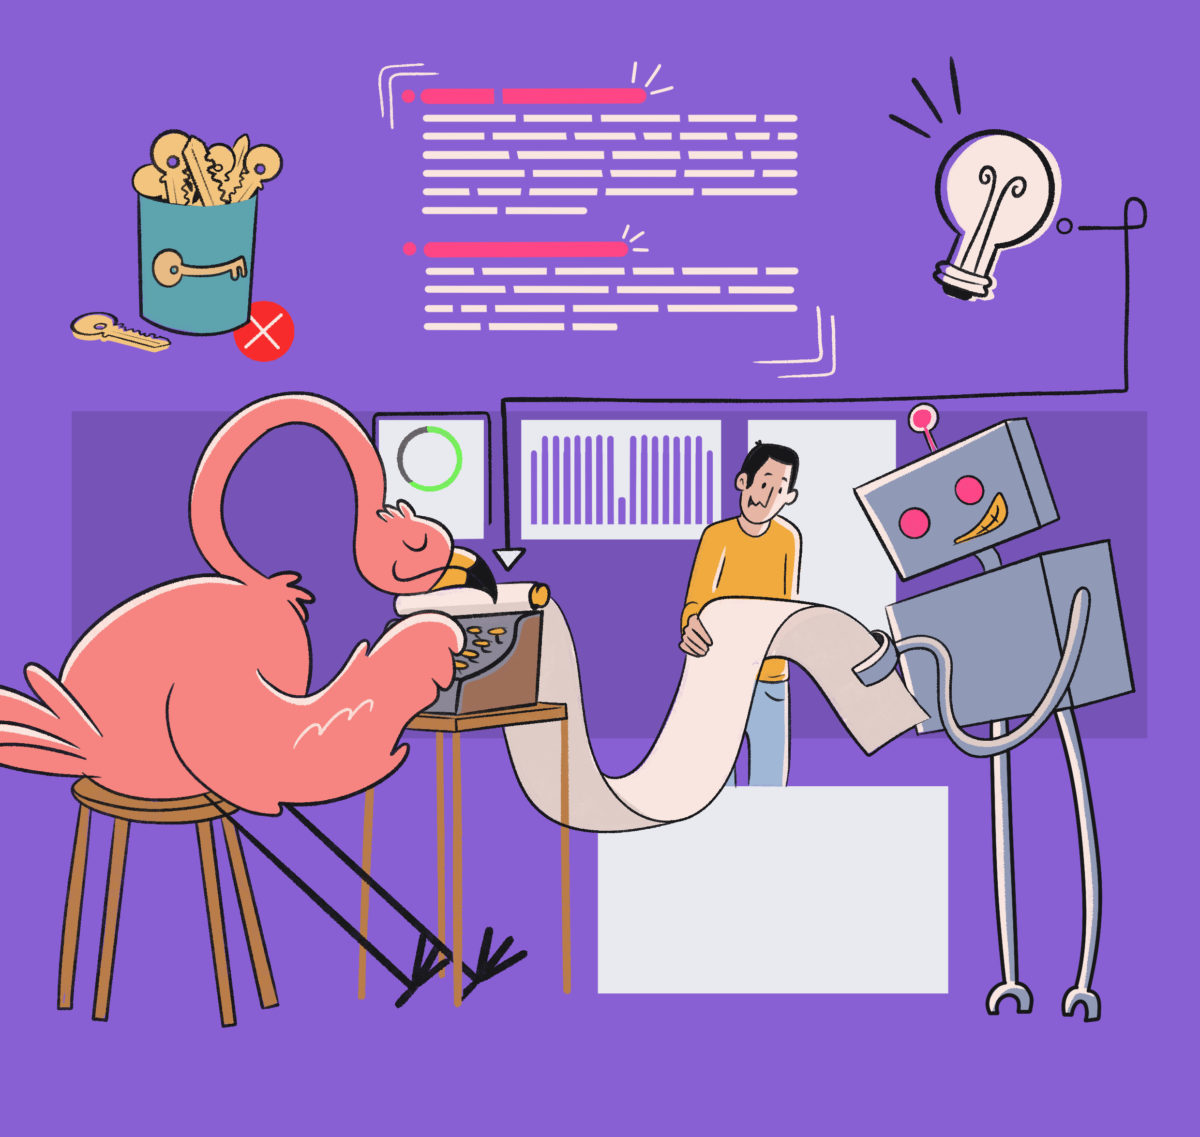 LinKGraph's Flamingo mascot sitting at a typewriter working on creating and SEO-friendly blog post that Google's robot is reading on the other side